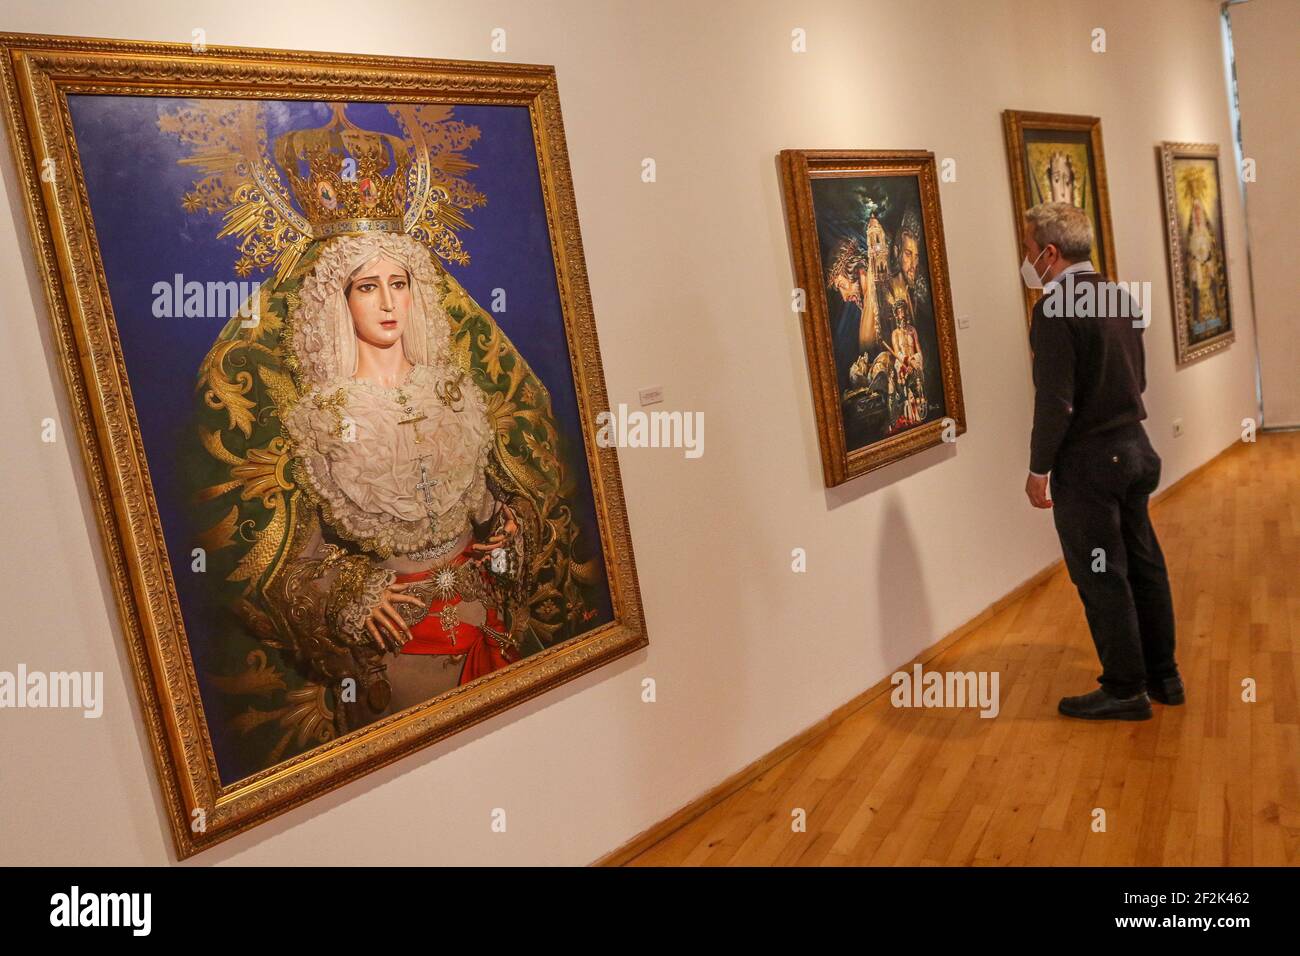 Malaga, Spain. March 12, 2021: March 12, 2021 (Malaga) to collective exhibition 'The Current Sacred Art in Malaga', which will accompany that of Azaustre, is composed of works by 12 prestigious artists. Visitors can admire the creations of RaÃºl Berzosa, Eugenio Chicano, Leonardo FernÃ¡ndez, Manuel Higueras, Antonio Montiel, Pepe Palma, Fernando Prini, Conchi Quesada, Félix Revello, Suso de Marcos, José MarÃ-a Ruiz Montes and Juan Vega. Nine painters and draughtsmen, and three sculptors (imagers), who offer the public part of the panorama of religious art in Malaga (Credit Image: © Lorenzo Car Stock Photo